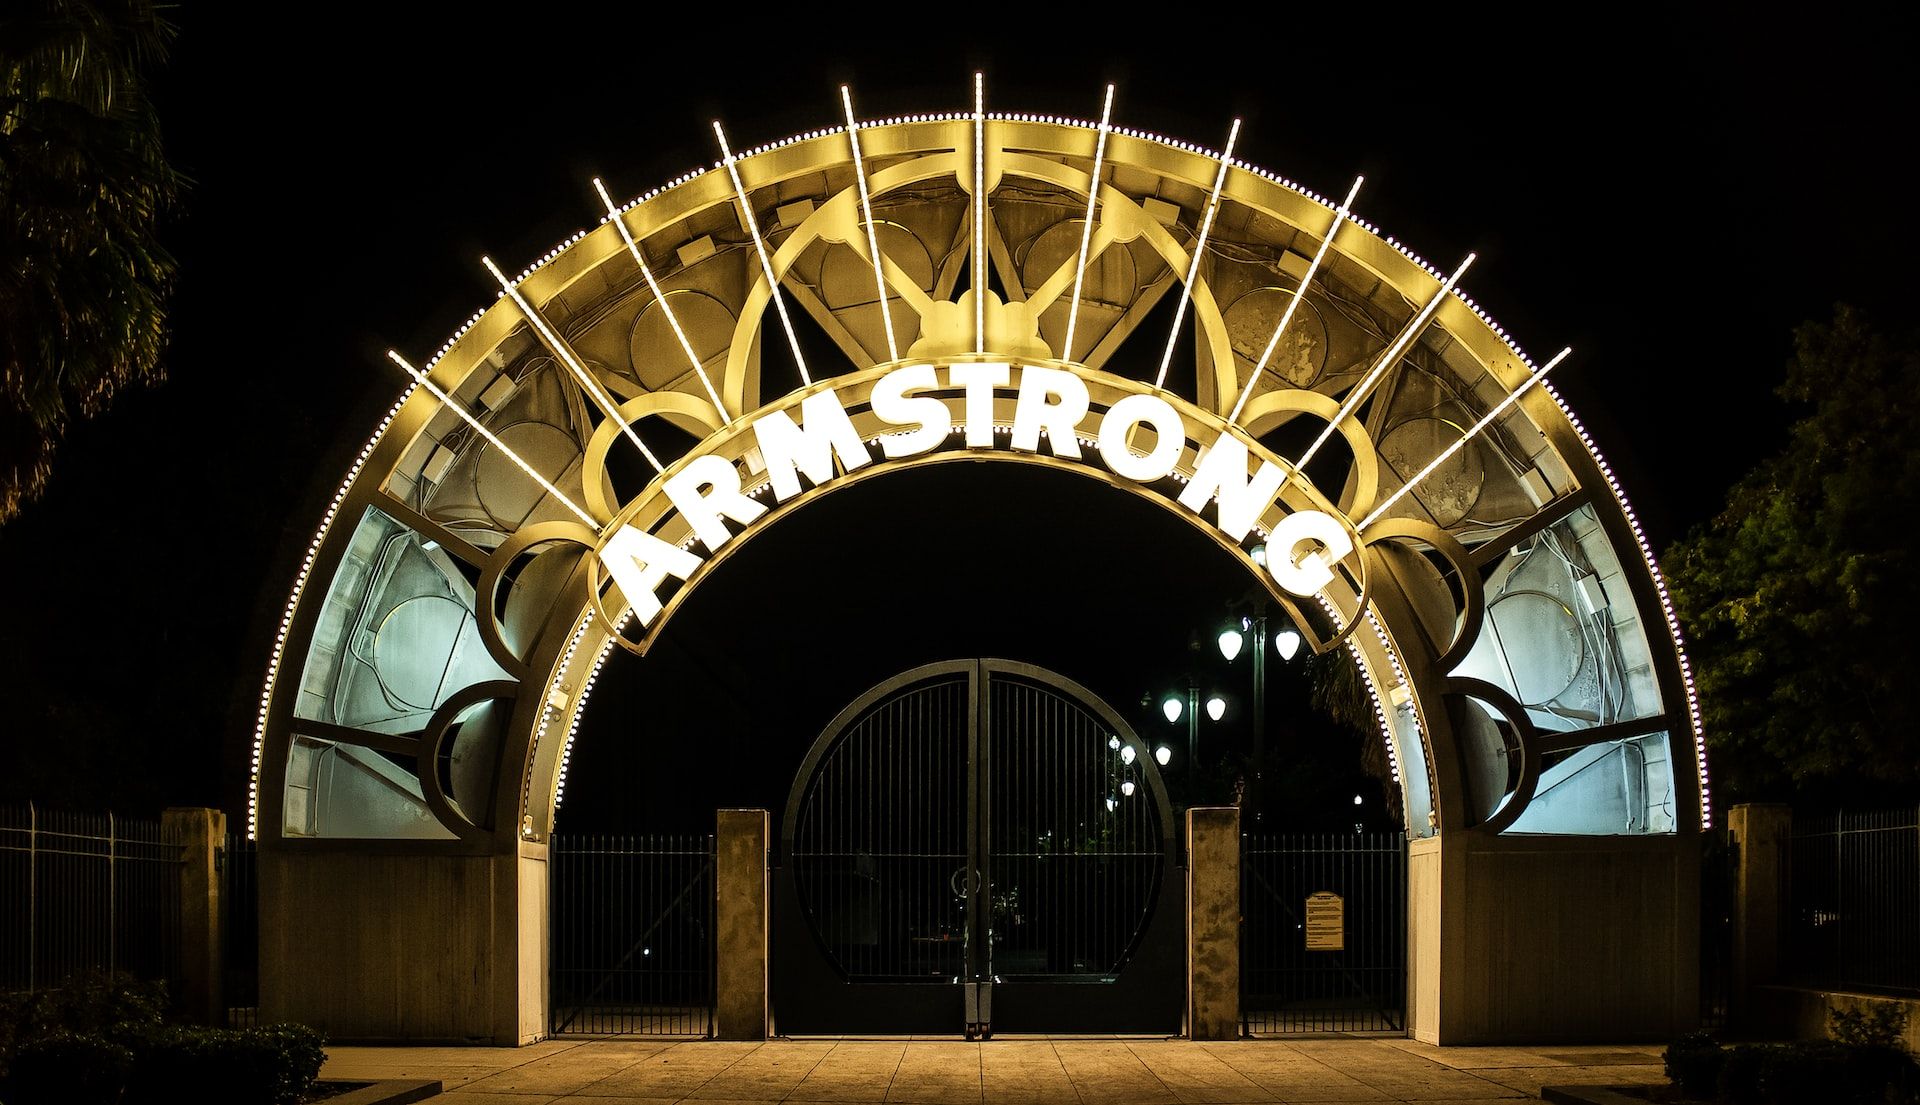 Louise Armstrong Park, New Orleans, USA